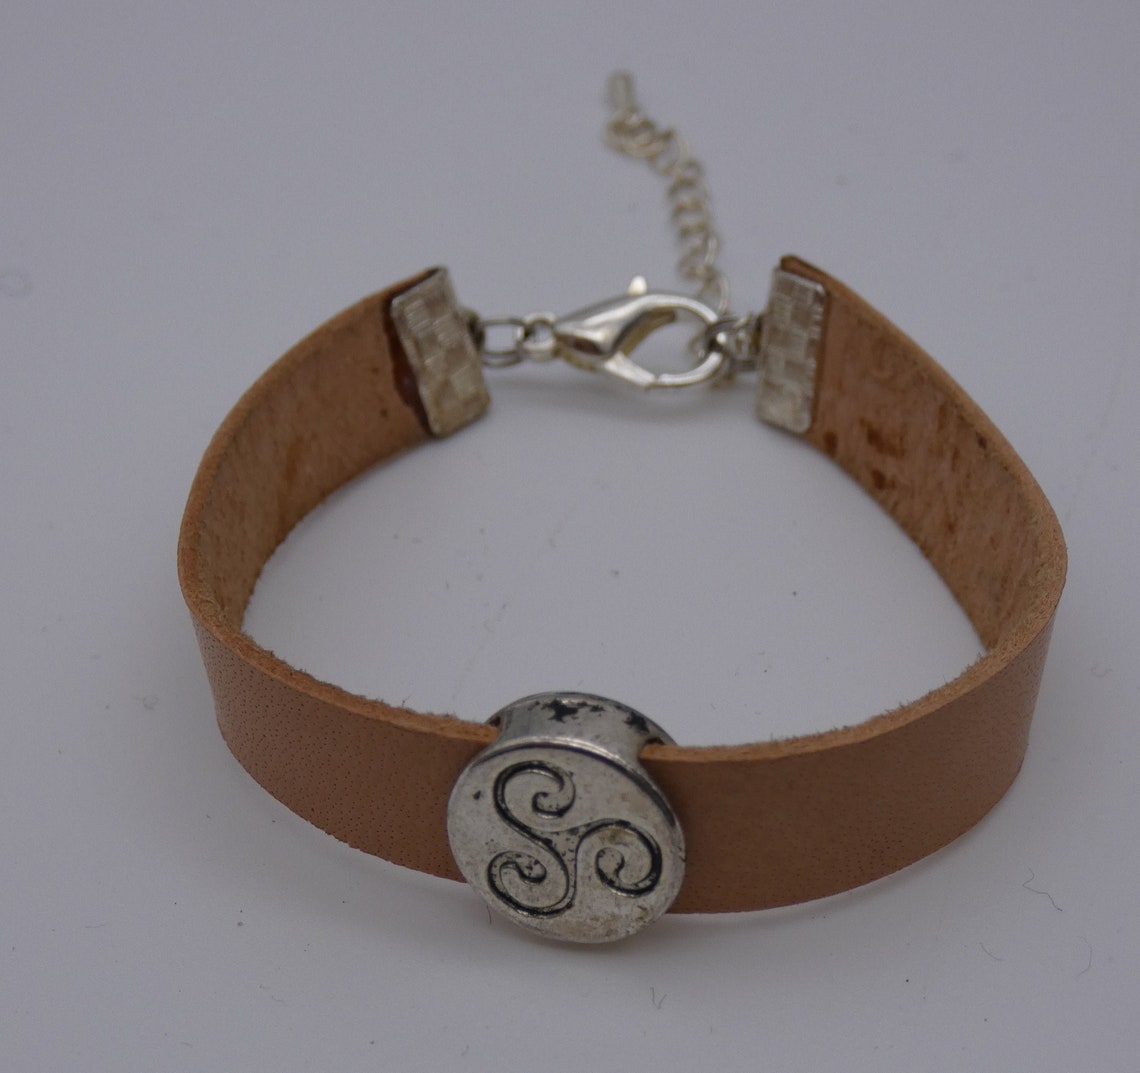  1 cm wide  natural colored leather bracelet with silver 